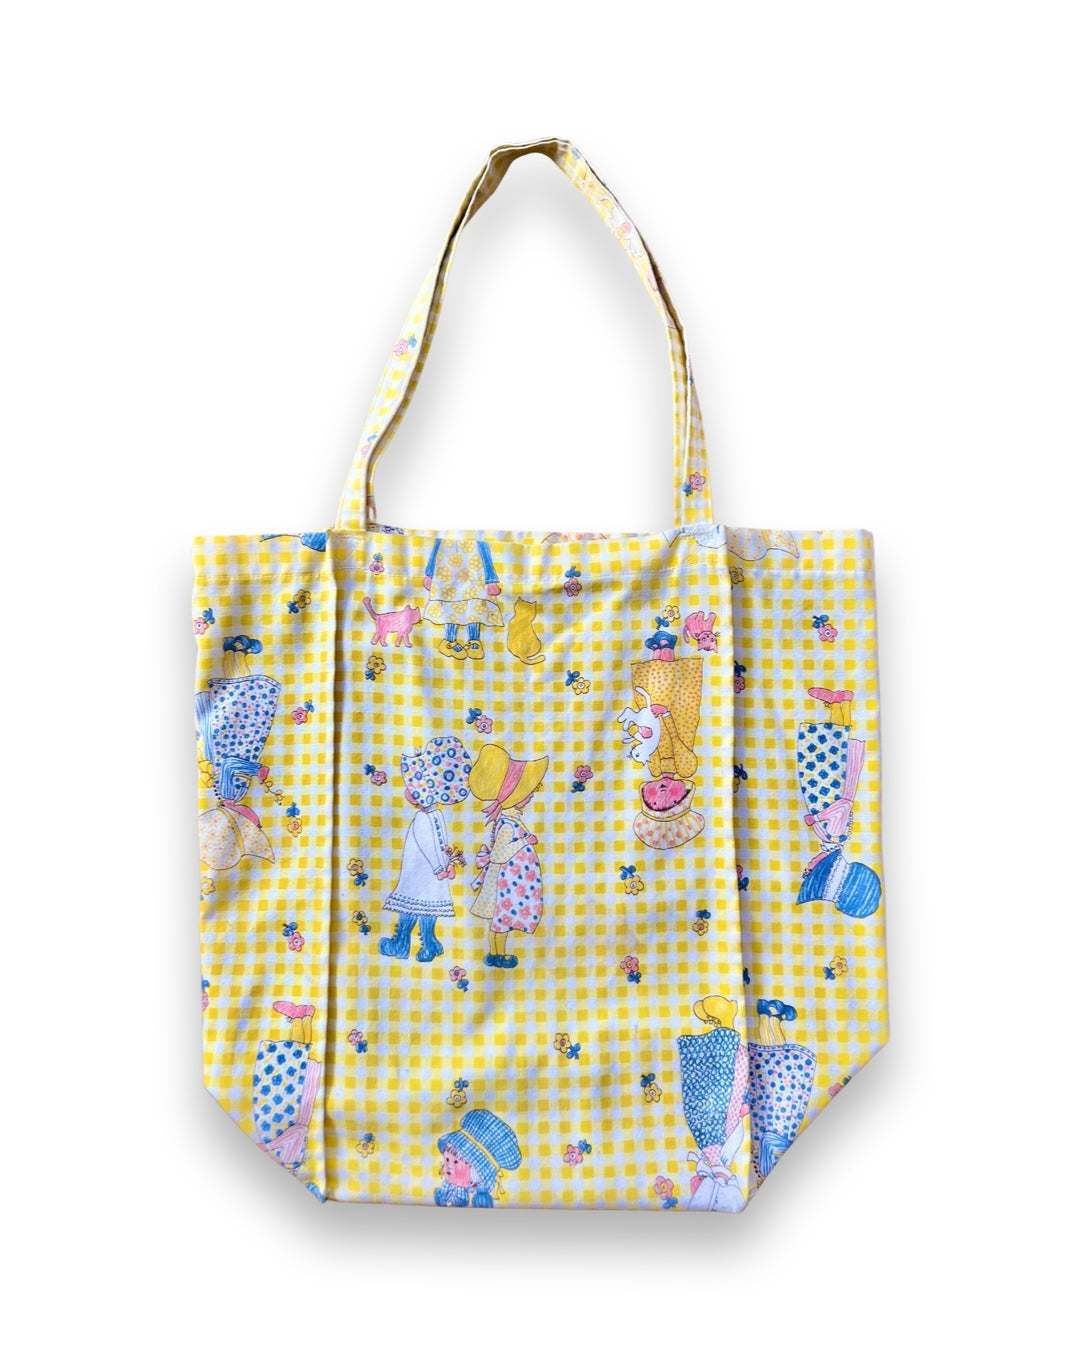 Kitschy Tote